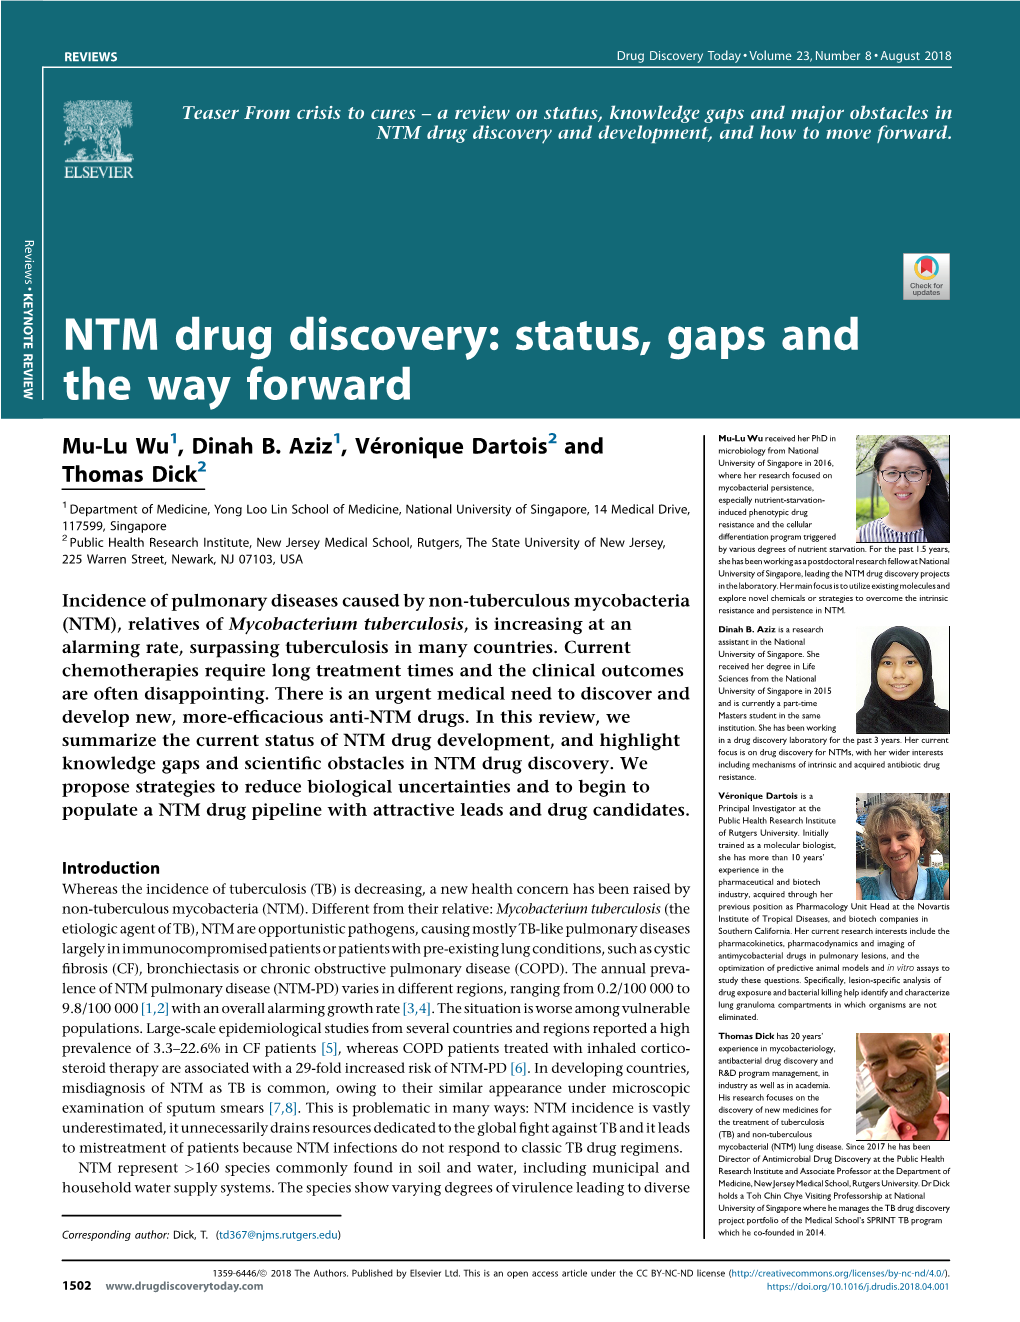 NTM Drug Discovery: Status, Gaps and the Way Forward